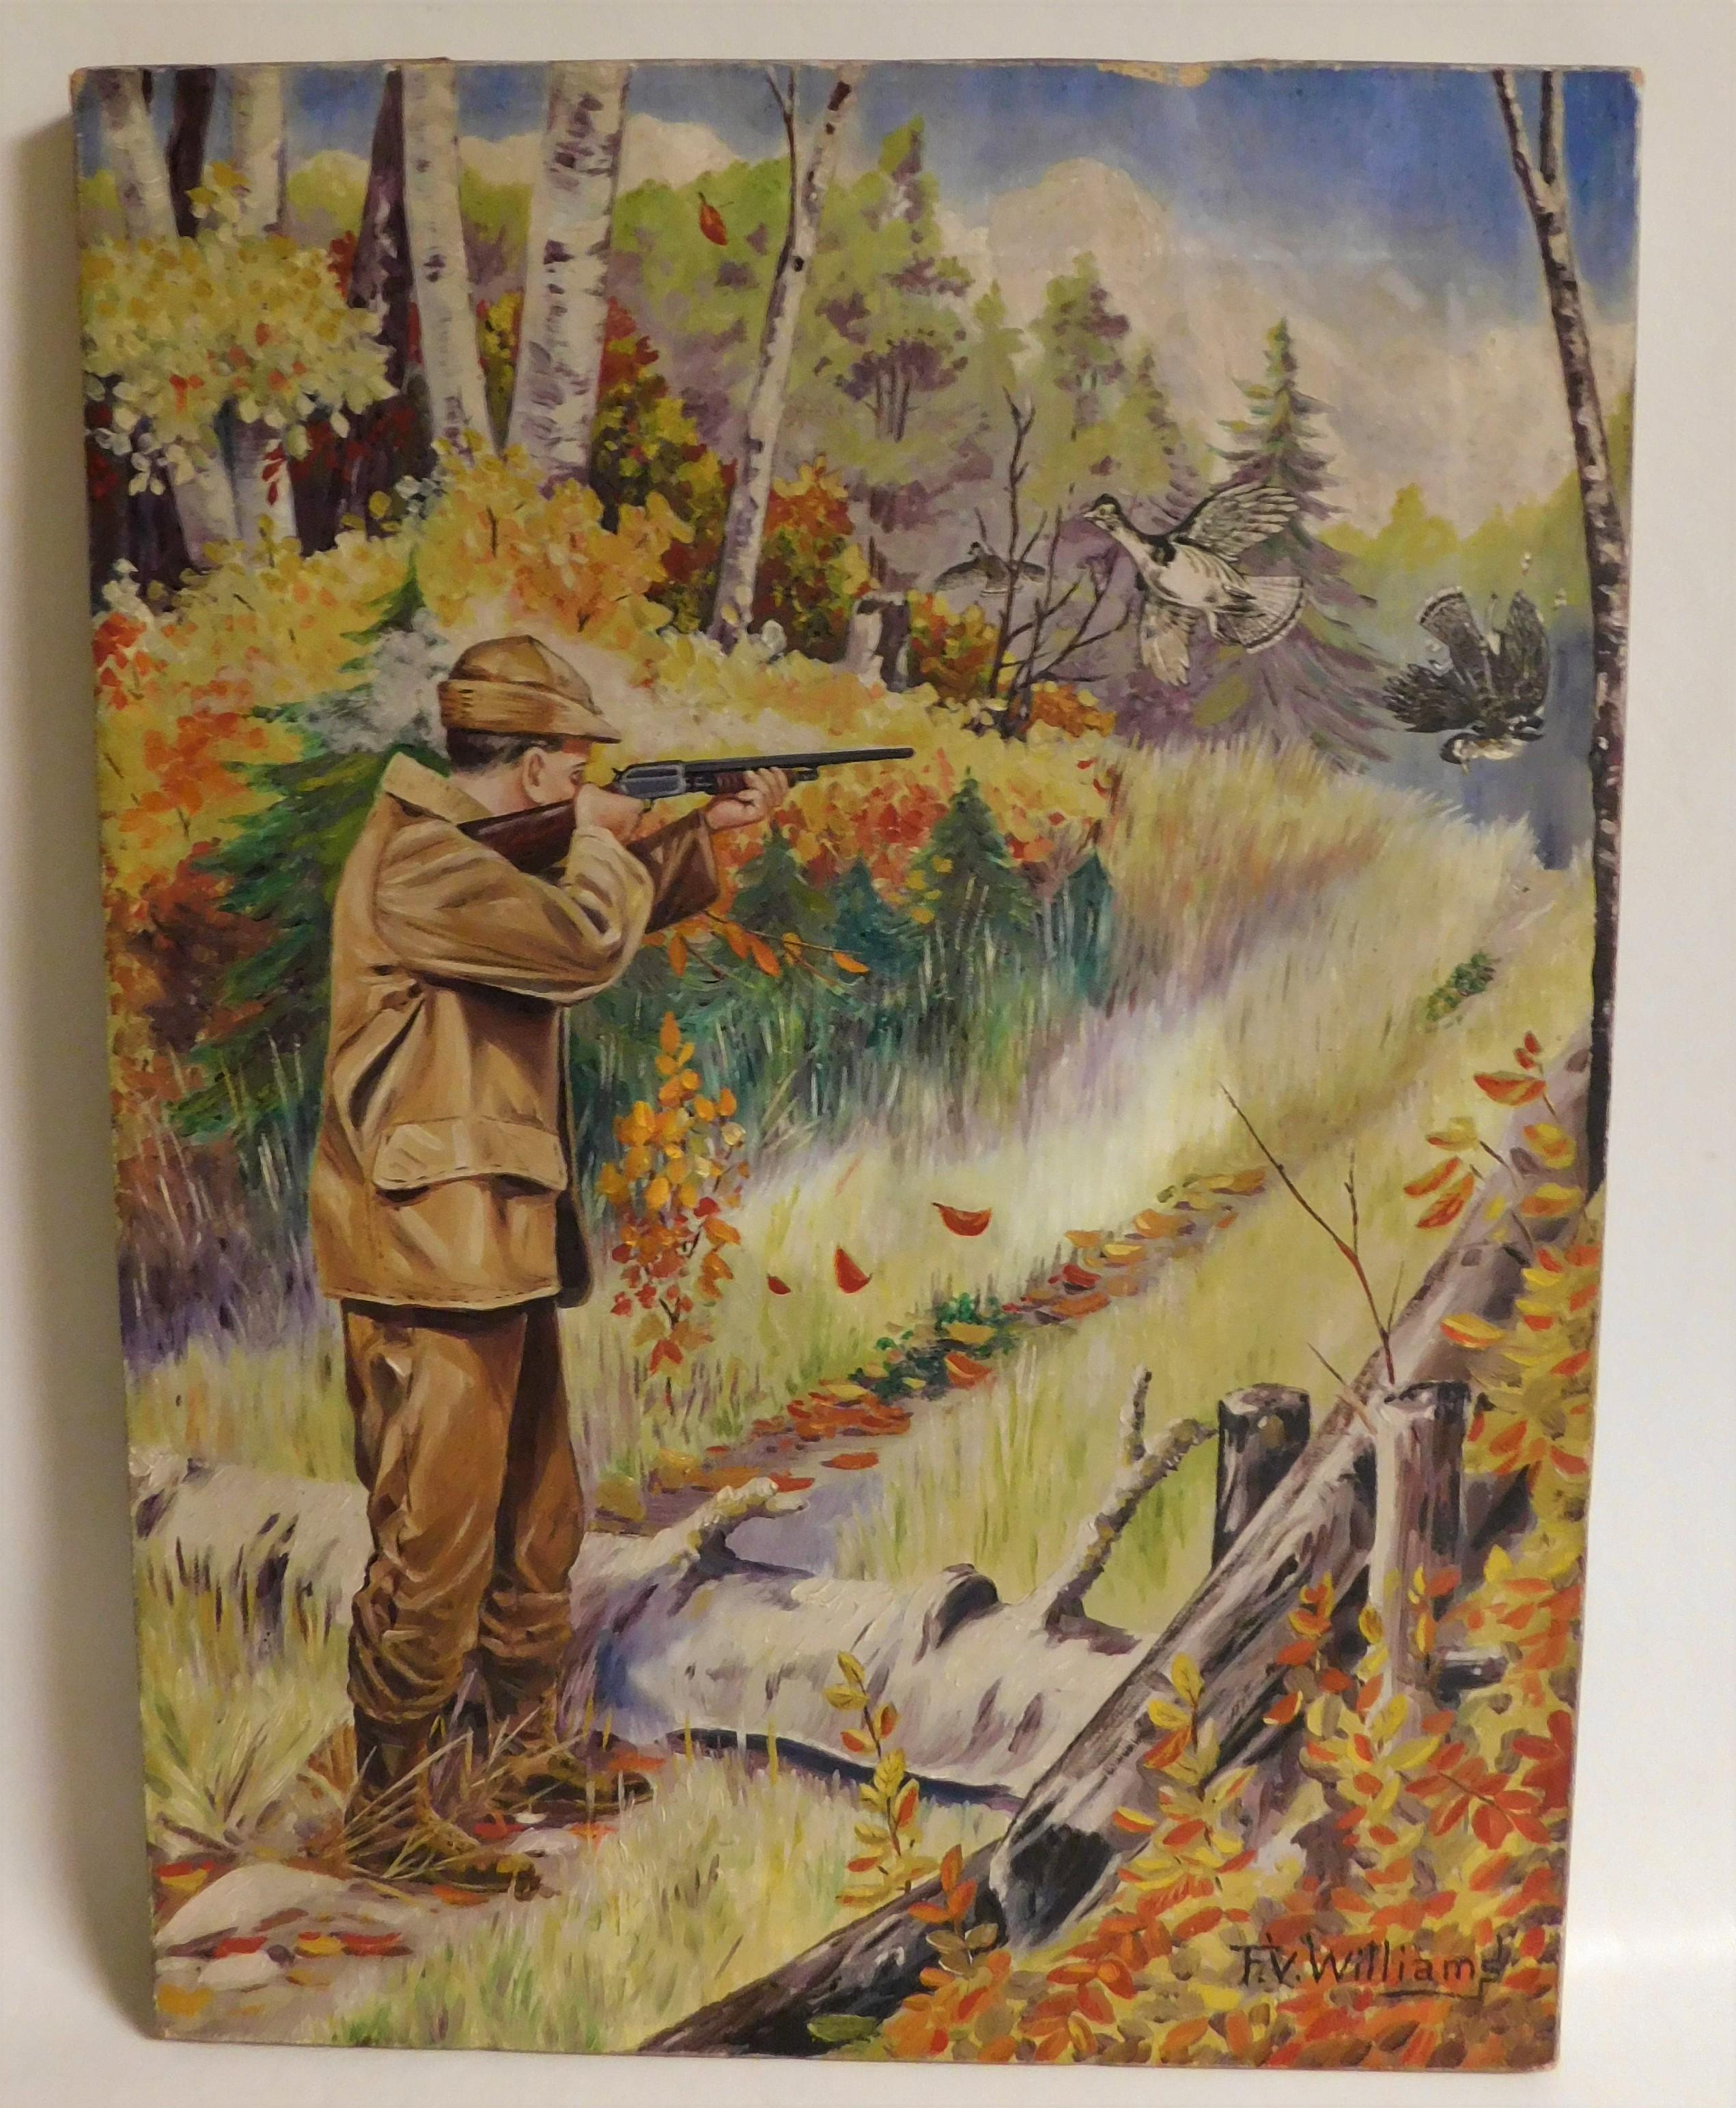 A fine and original oil on canvas painting by Canadian F.V. Williams, a noted and accomplished writer, illustrator and artist. This painting was presented to Mr. J Mercer with the compliments of the publisher of Bodtrun (?) Canada W.J. Taylor Nov. 6